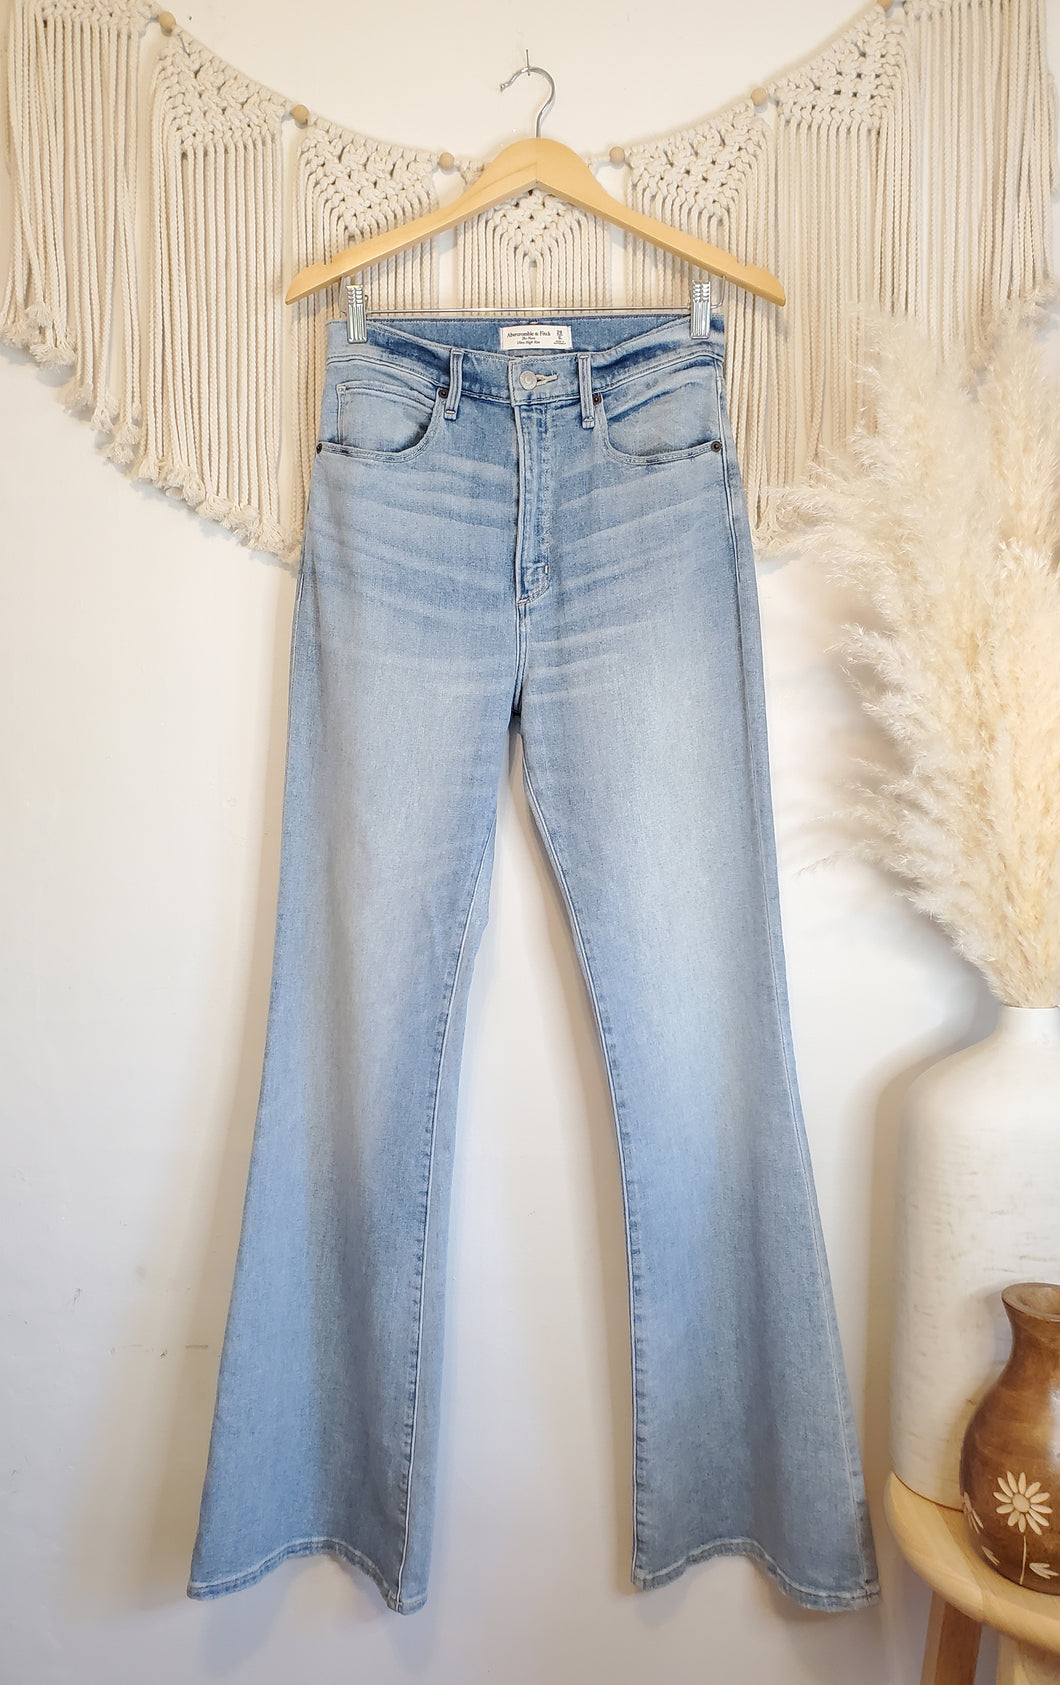 A&F High Rise Flare Jeans (28/6 Long)